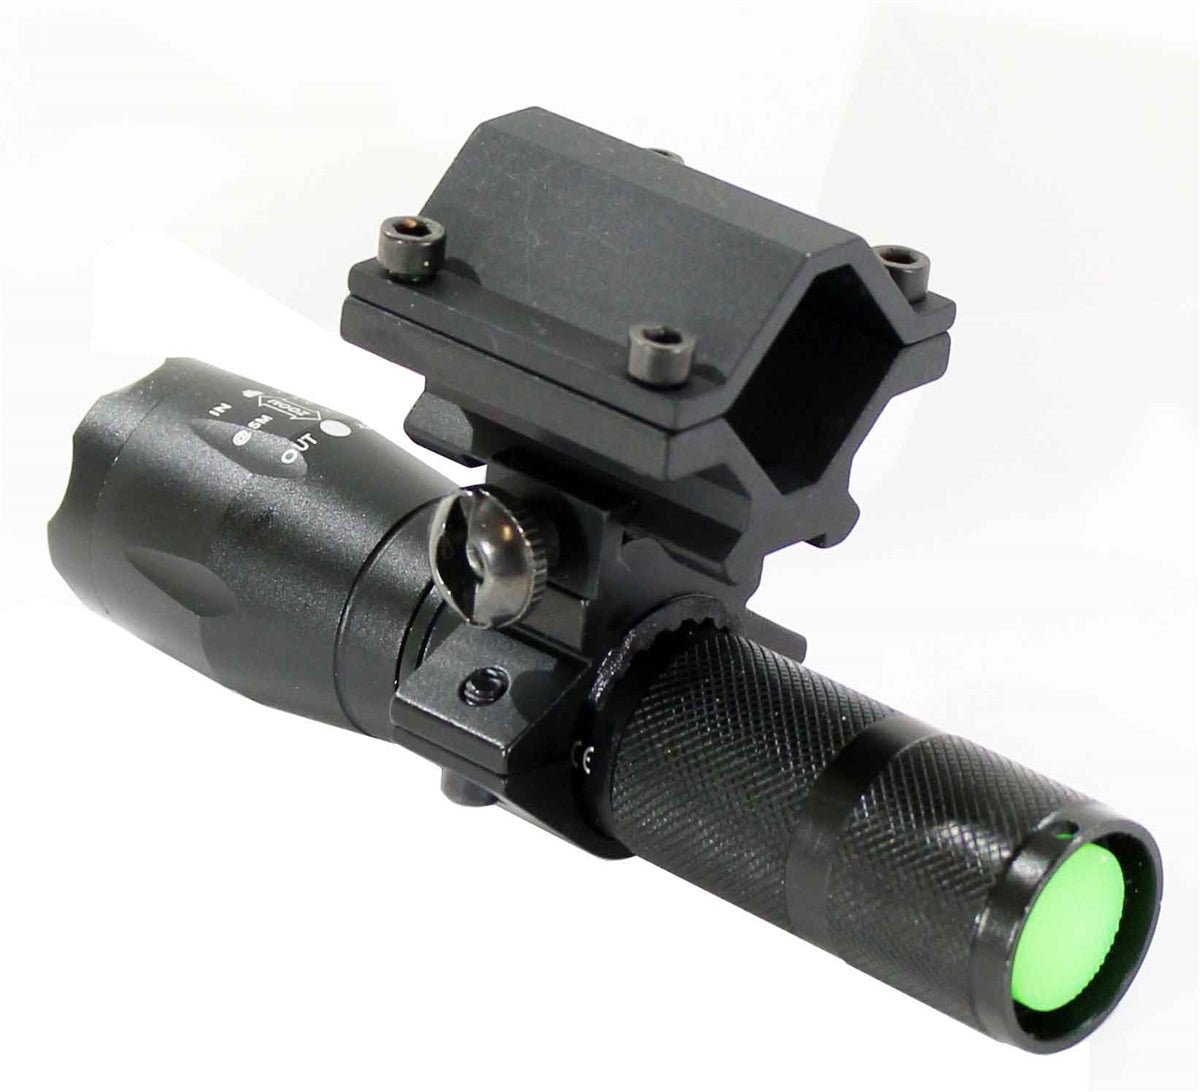 Tactical 1200 Lumen Flashlight With Mount Compatible With Mossberg 500 20 Gauge Pumps. - TRINITY SUPPLY INC